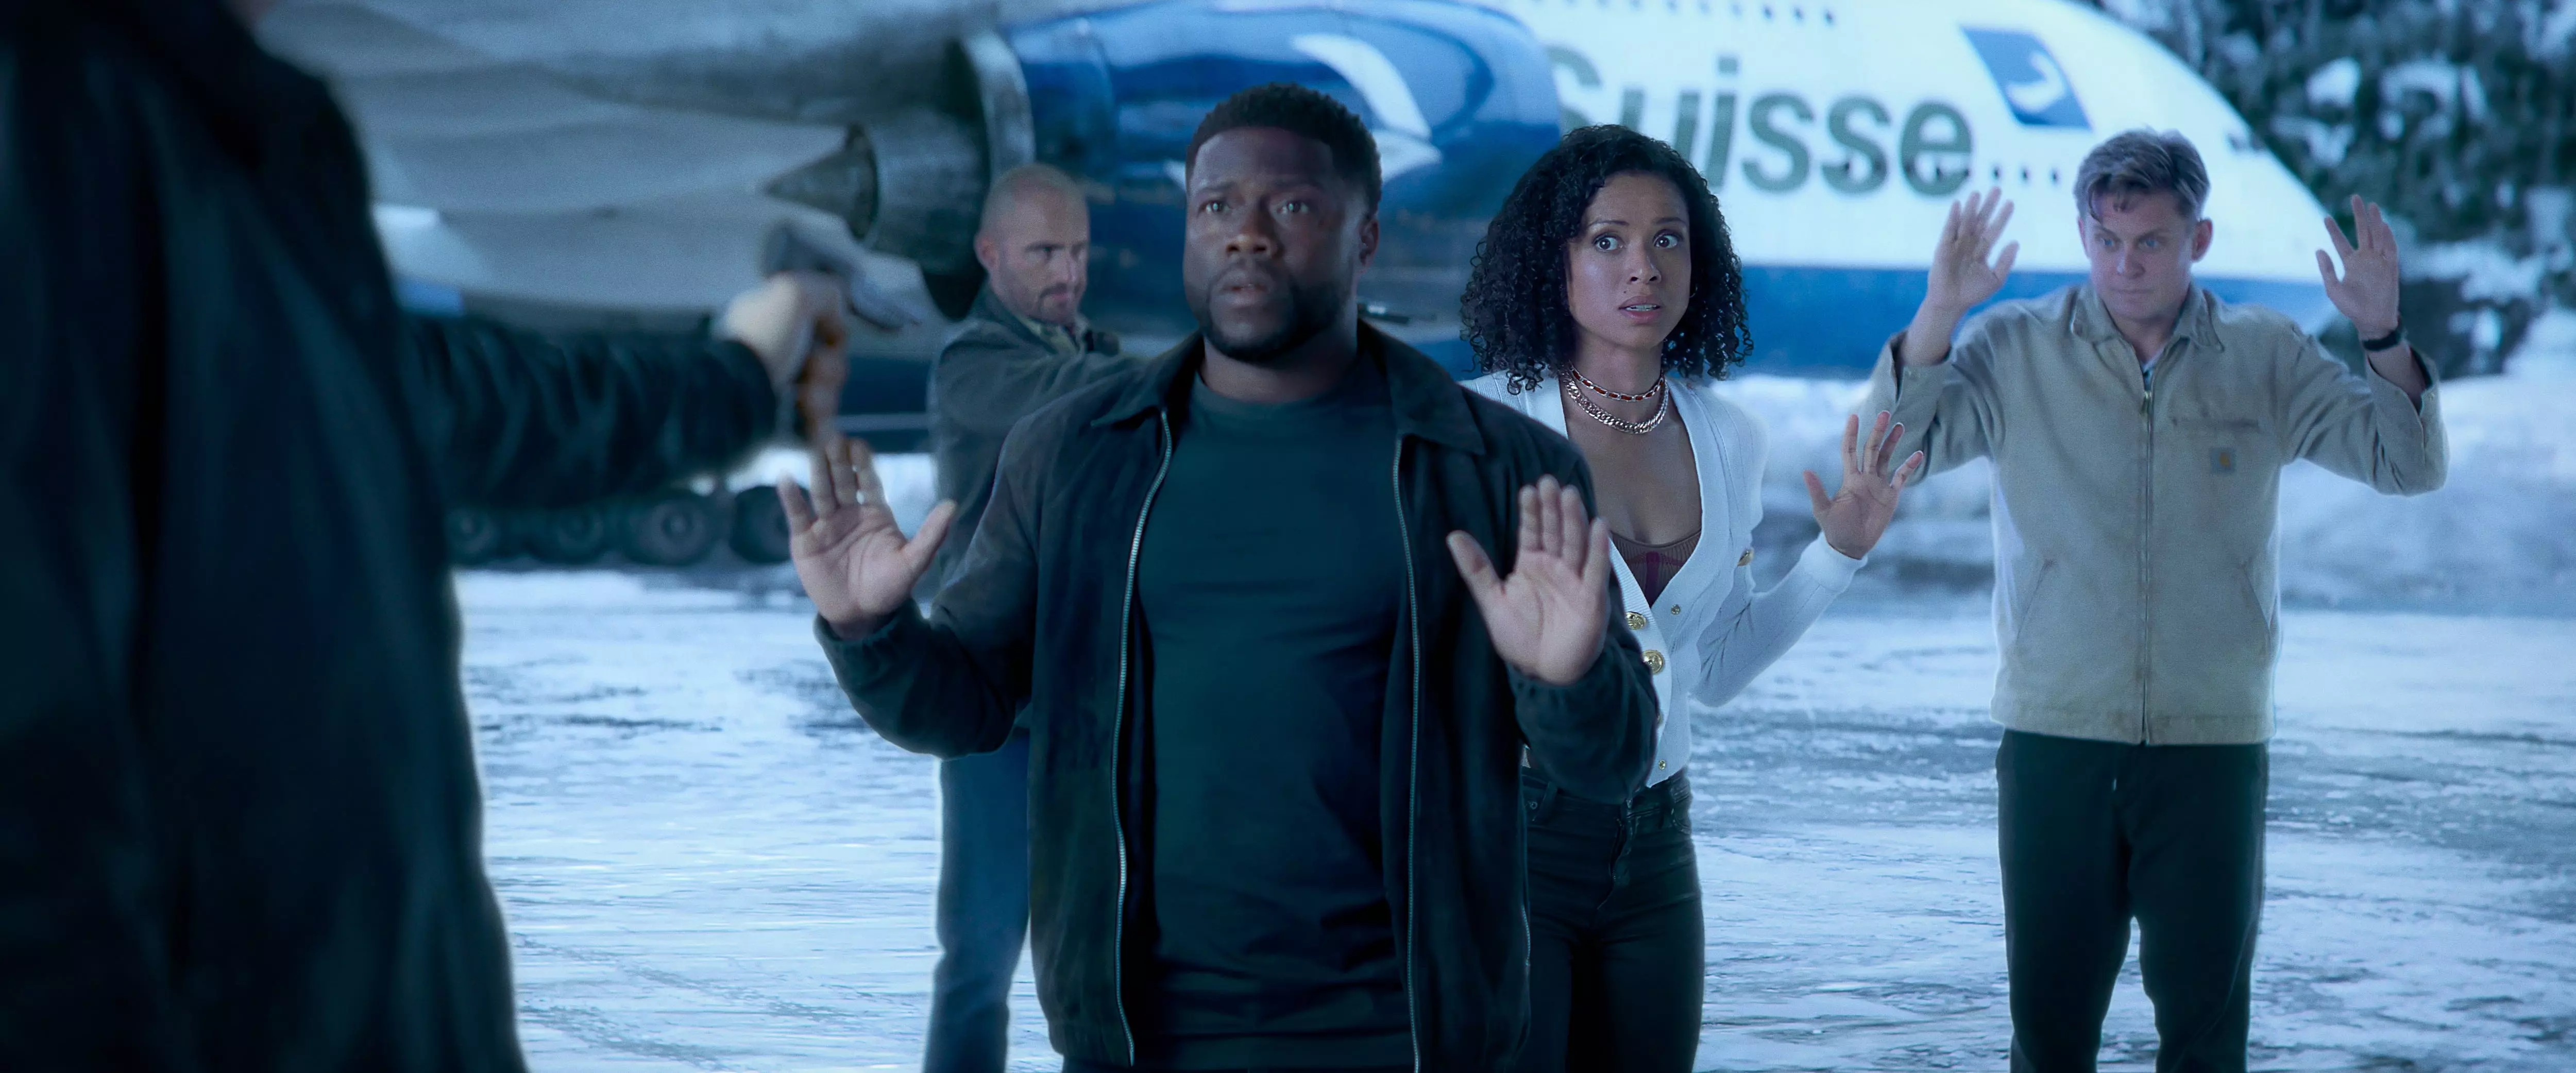 Cyrus (Kevin Hart, center) and his ex Abby (Gugu Mbatha-Raw) are in a spot of trouble in the action-packed heist film "Lift."